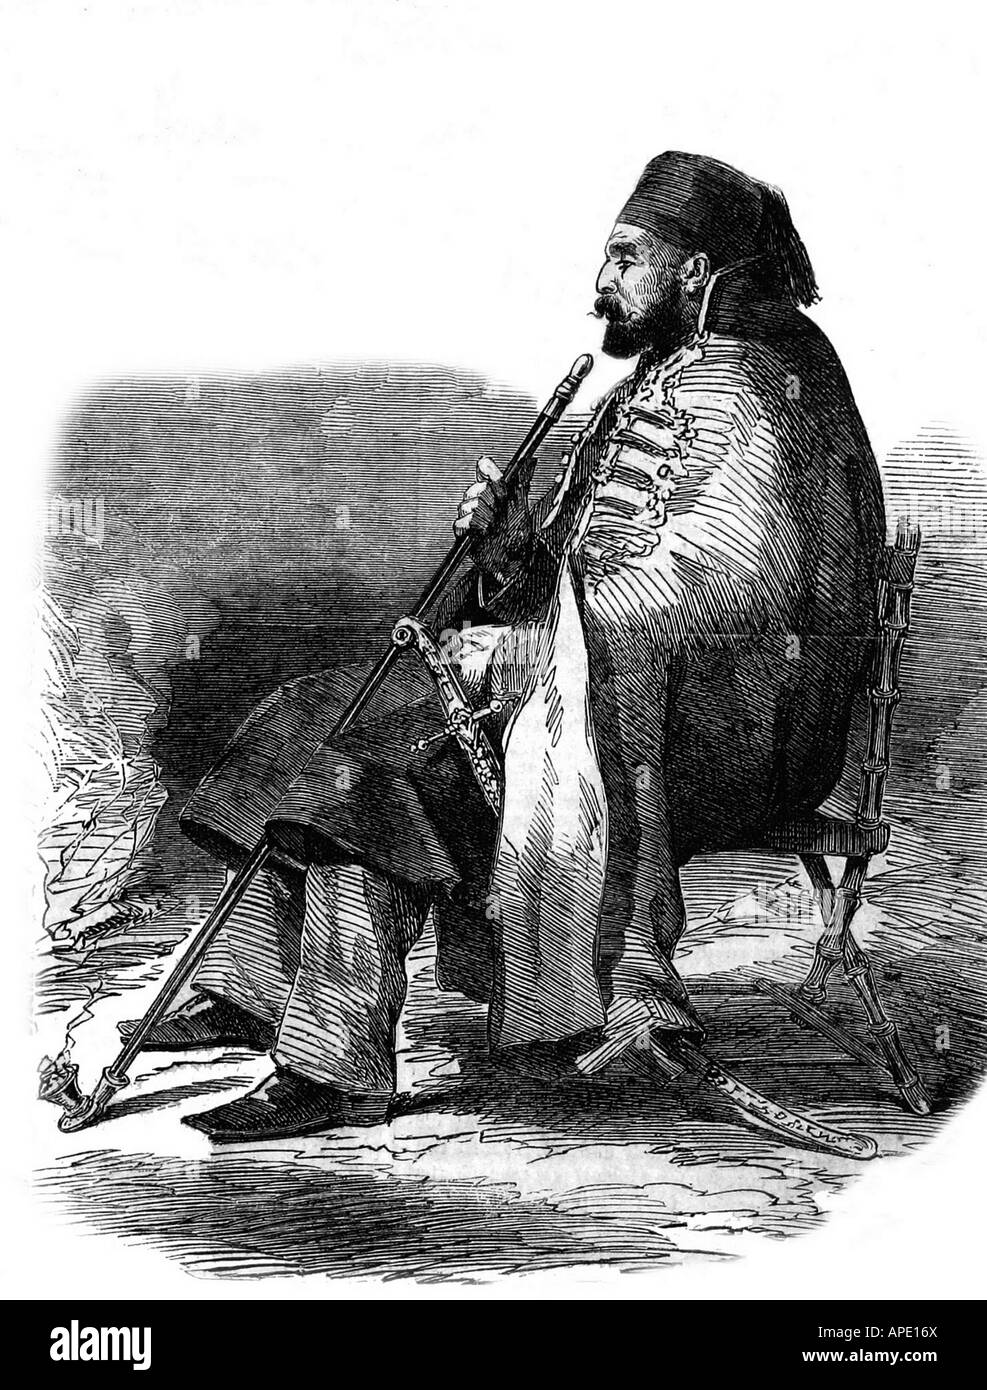 Muhammad Ali Pasha, 1769 - 12.8.1849, Viceroy of Egypt 13.7.1841 - 12.8.1849, full length, sitting, incisione in legno, 1854, , Foto Stock